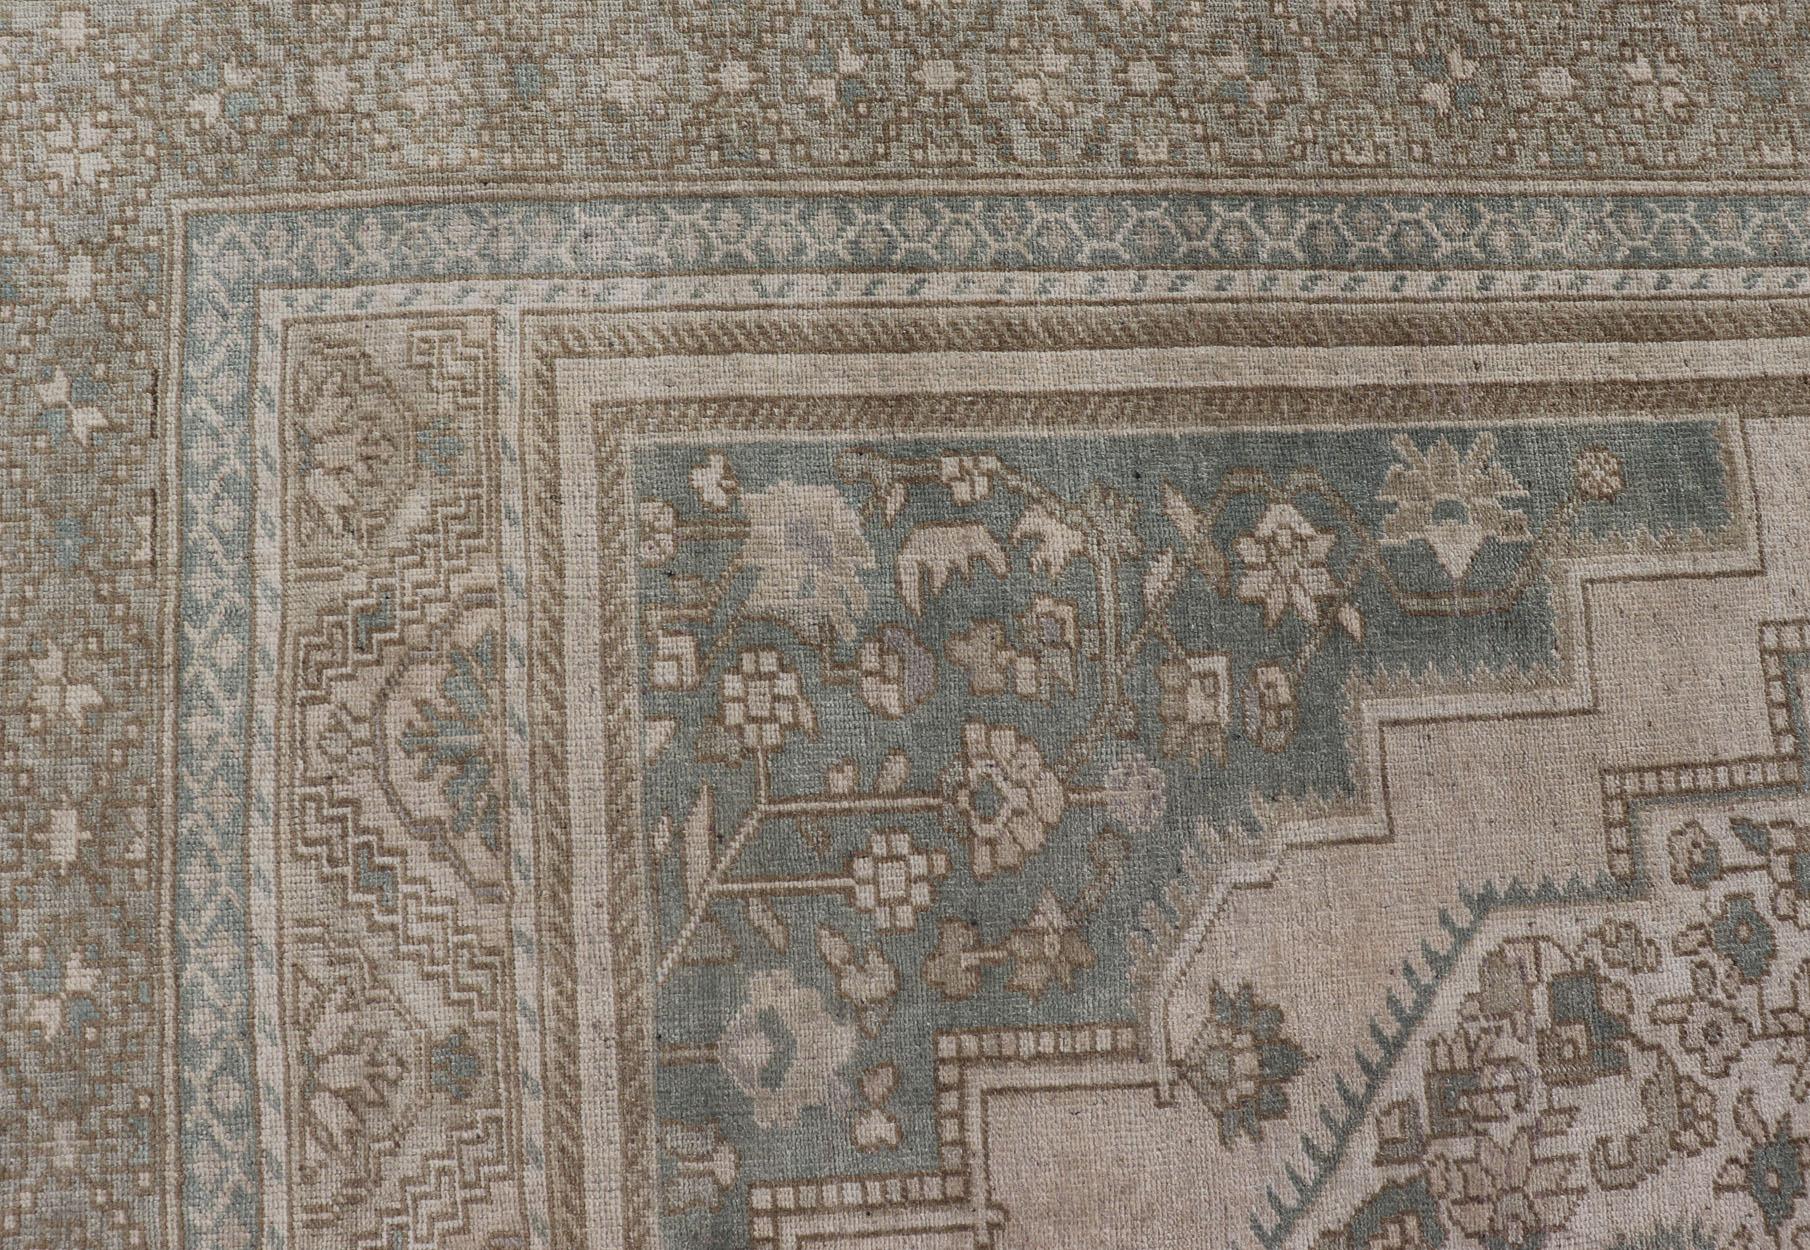 Turkish Oushak Vintage Medallion Rug in Light Blue-Green, Tan, Taupe, and Cream In Good Condition For Sale In Atlanta, GA